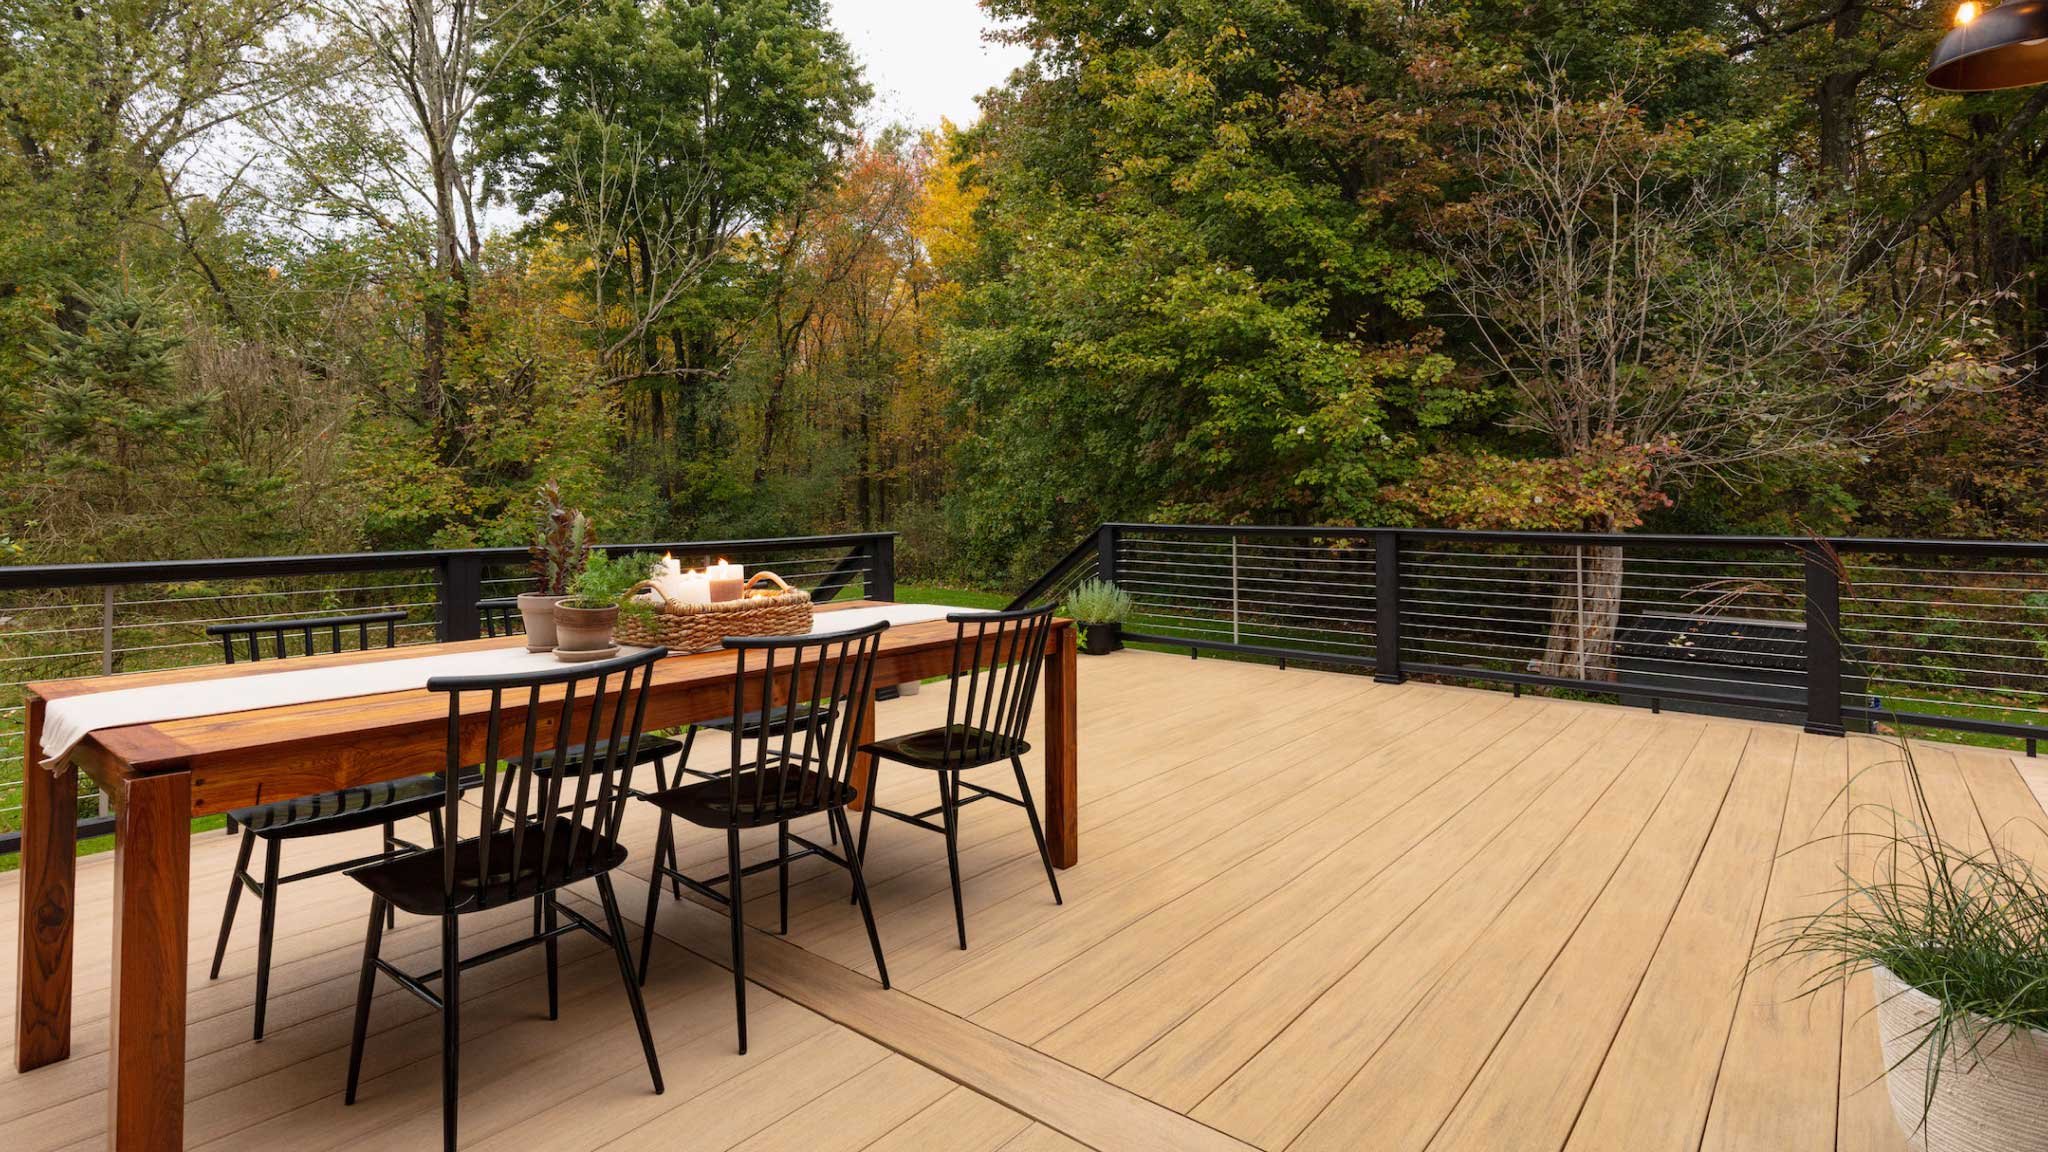 Stylish new deck with outdoor dining set and fall trees in background